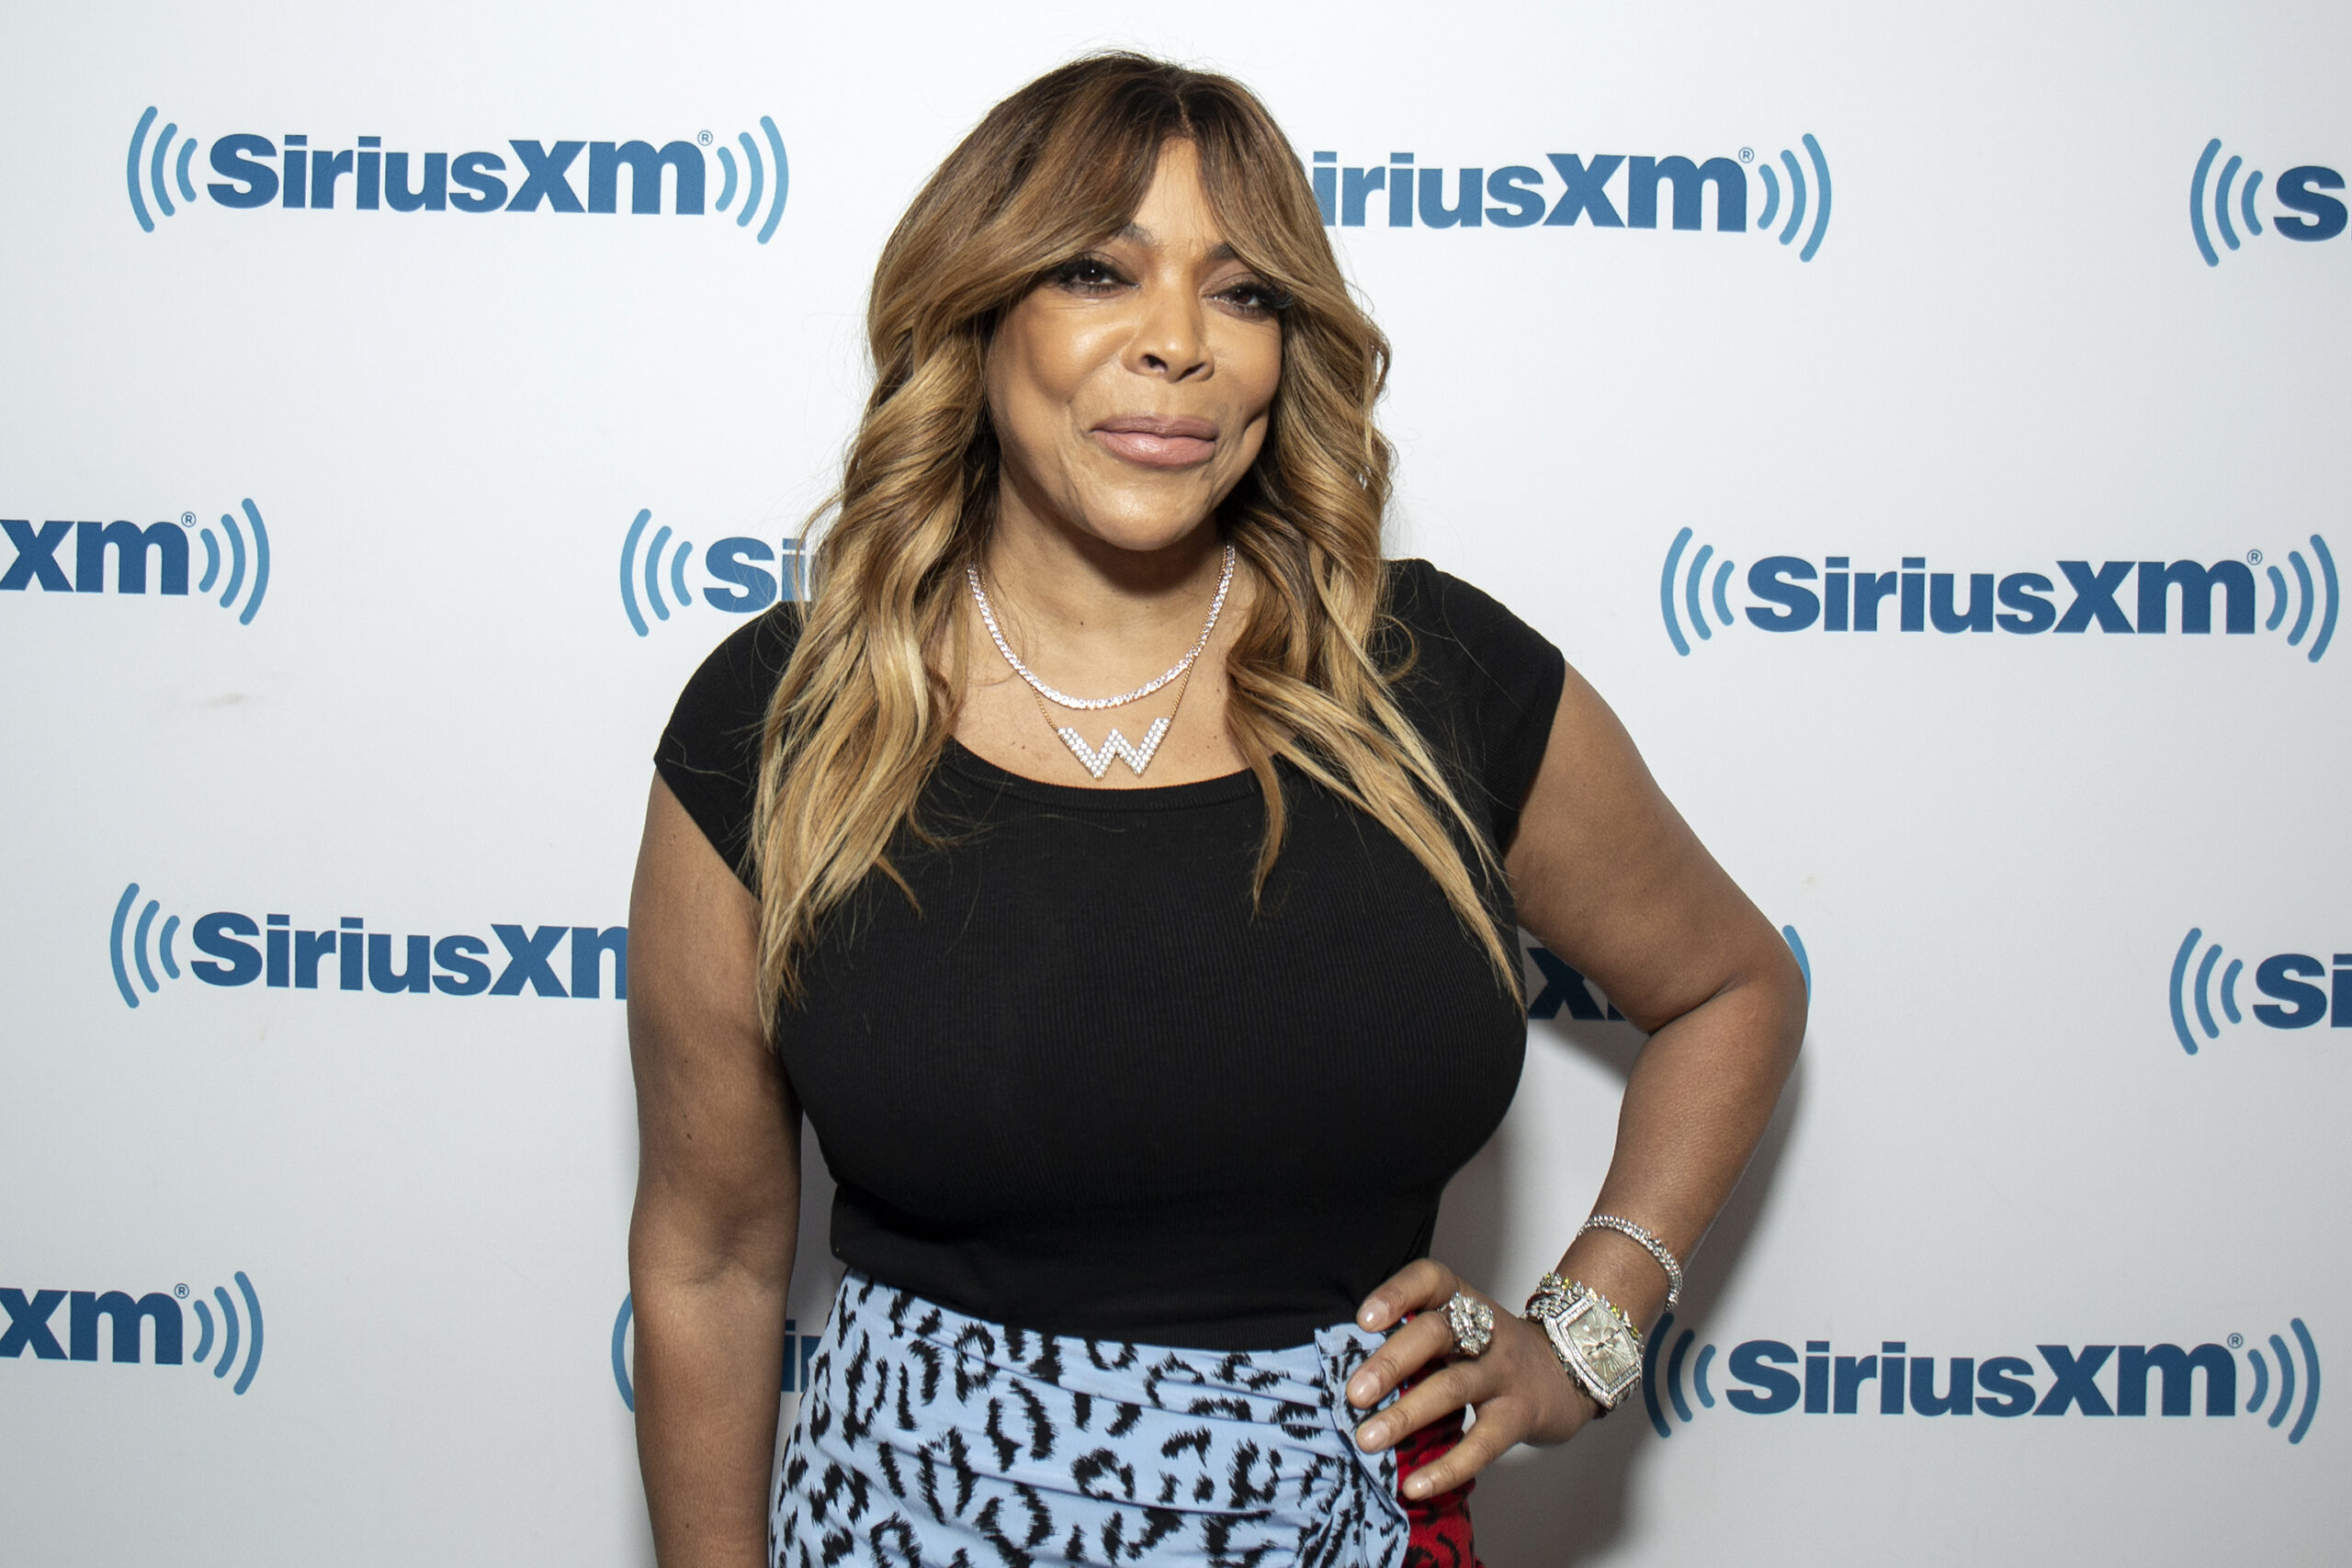 Wendy Williams' Shocking Docuseries Earnings Spark Outrage Amid Exploitation Allegations